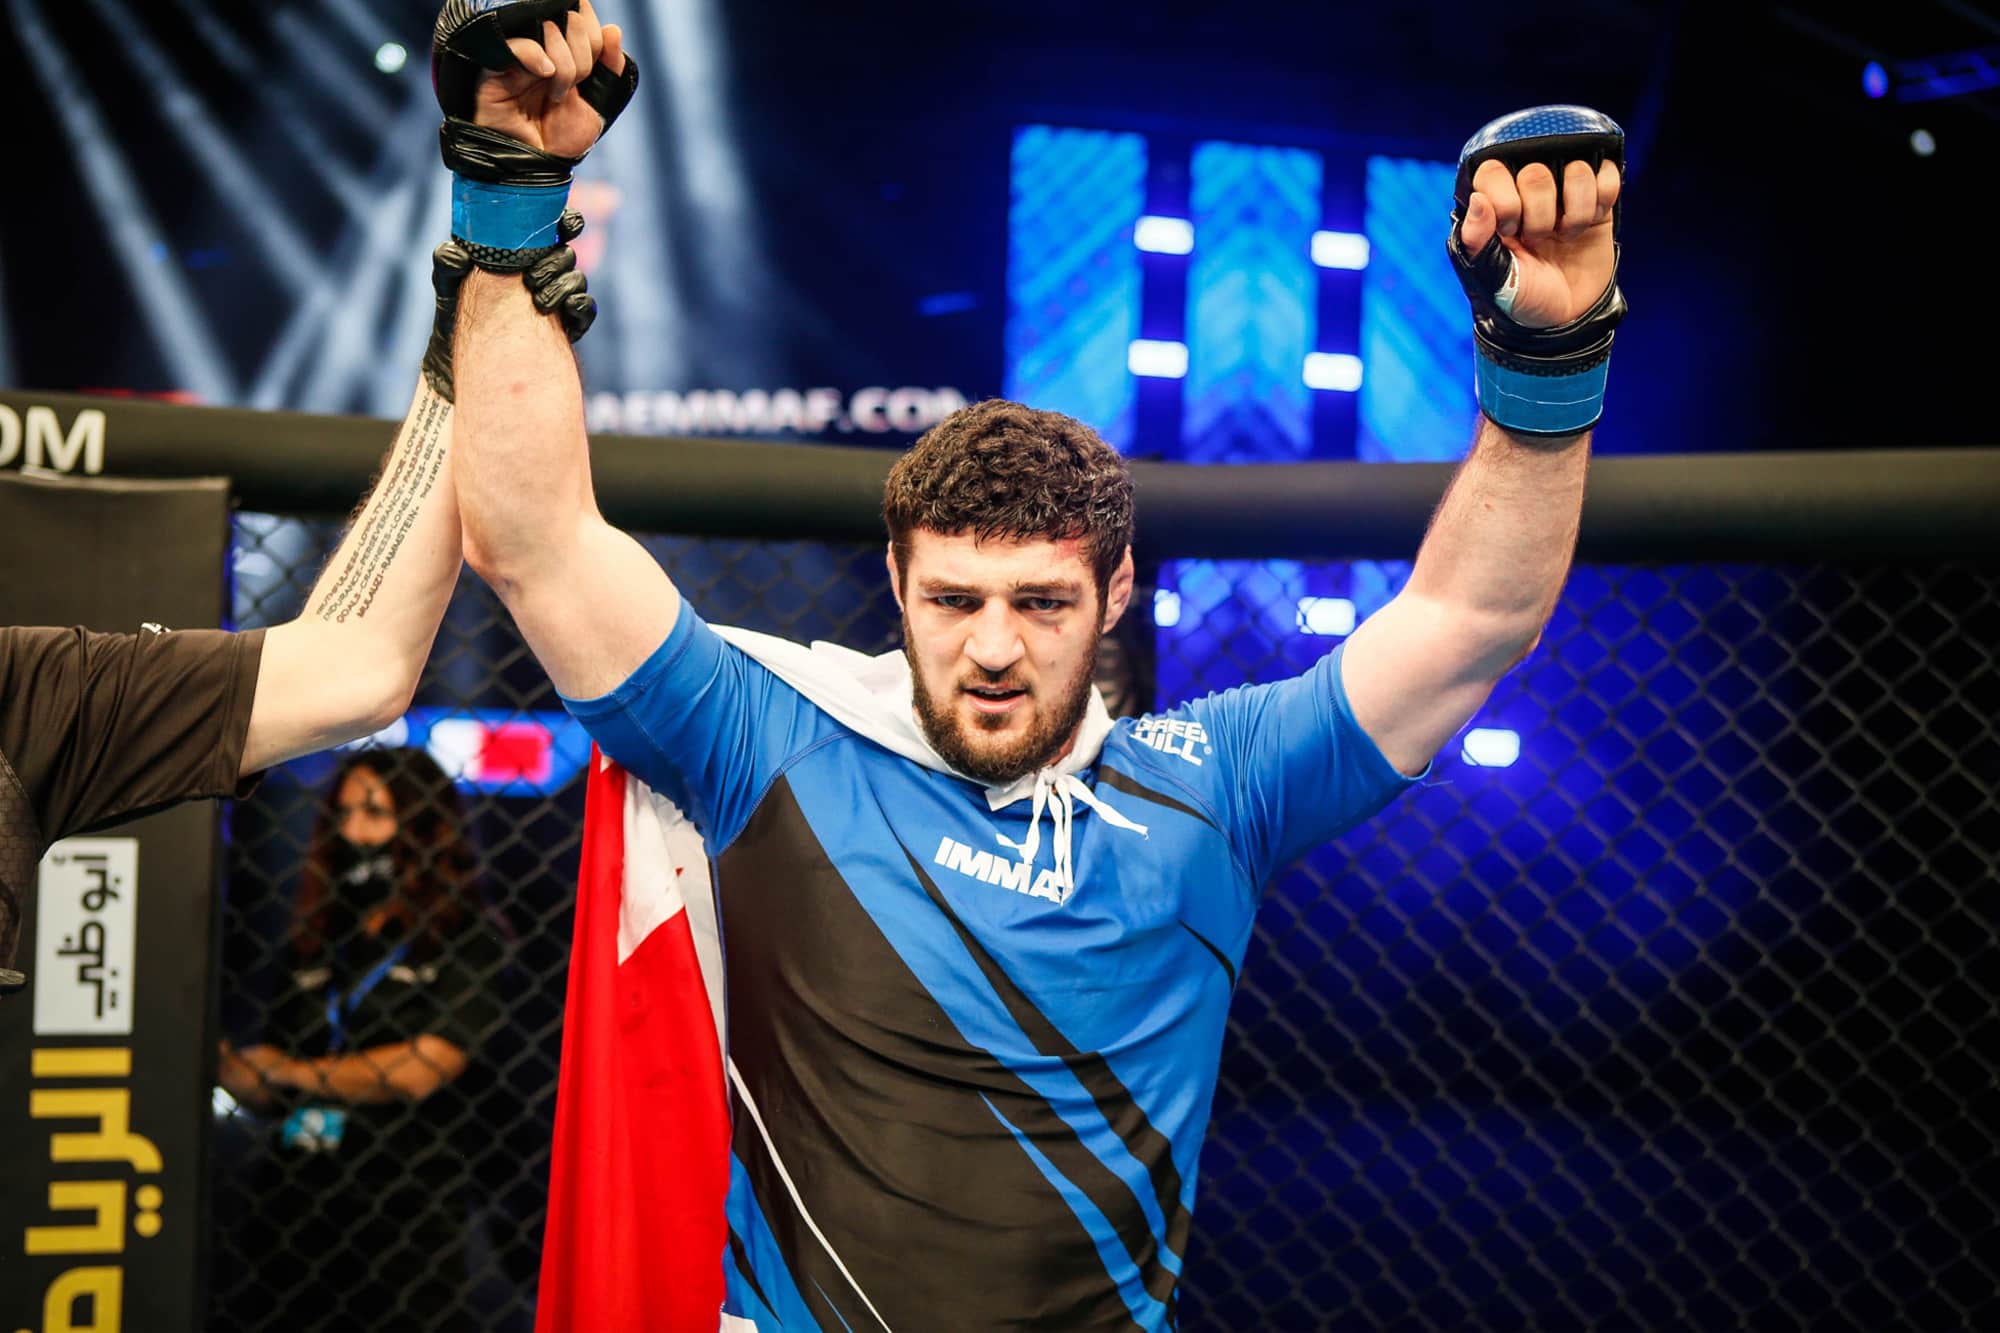 Rasul Magomedov Faces Fresh Competition in Bid to Become Two-Time World Champion